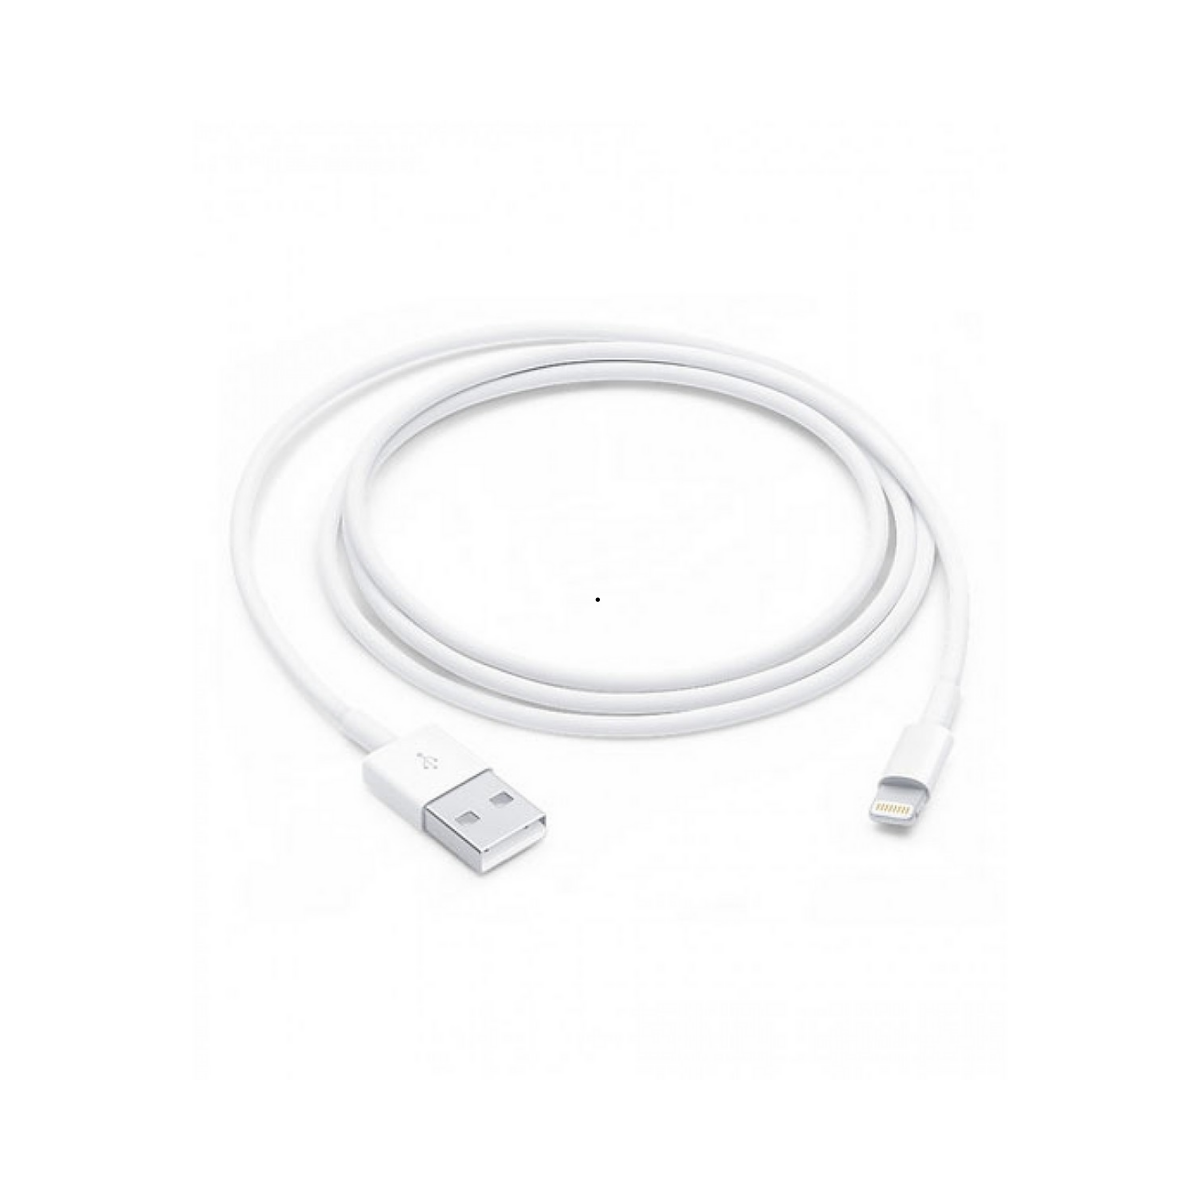 Apple Lightning to USB Cable - (1 Meter)